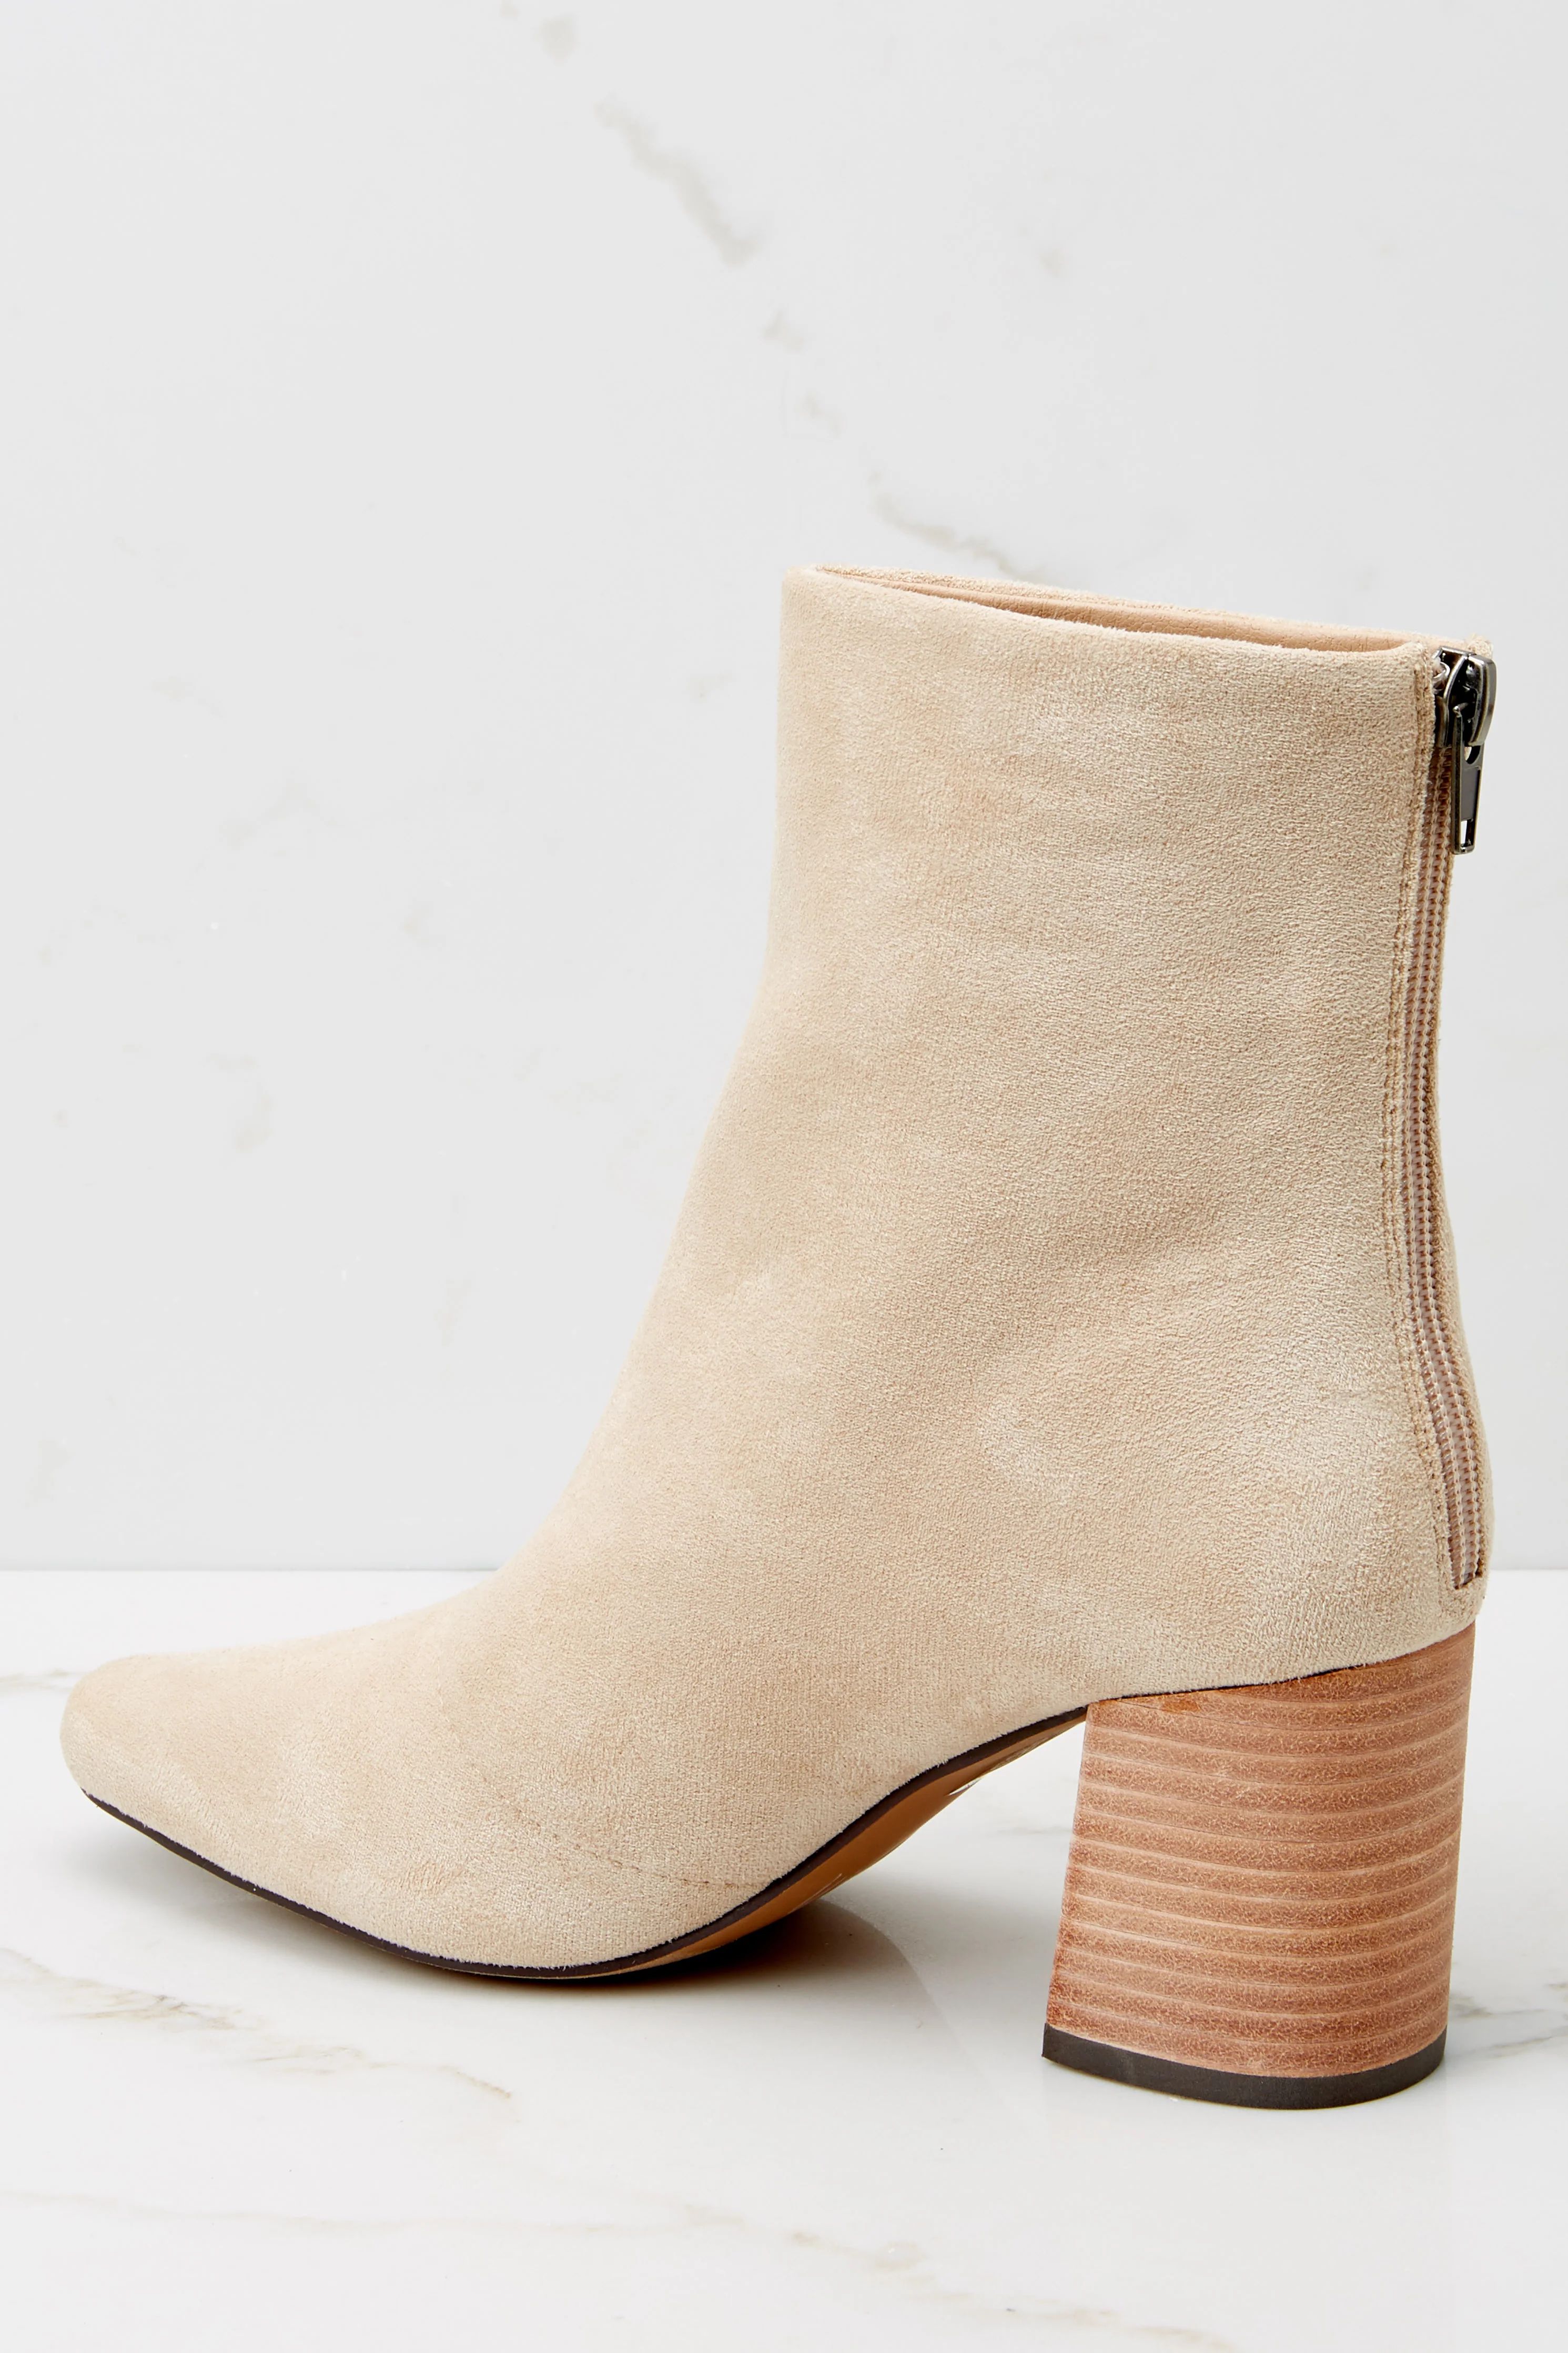 Whisk Me Away Nude Ankle Booties | Red Dress 